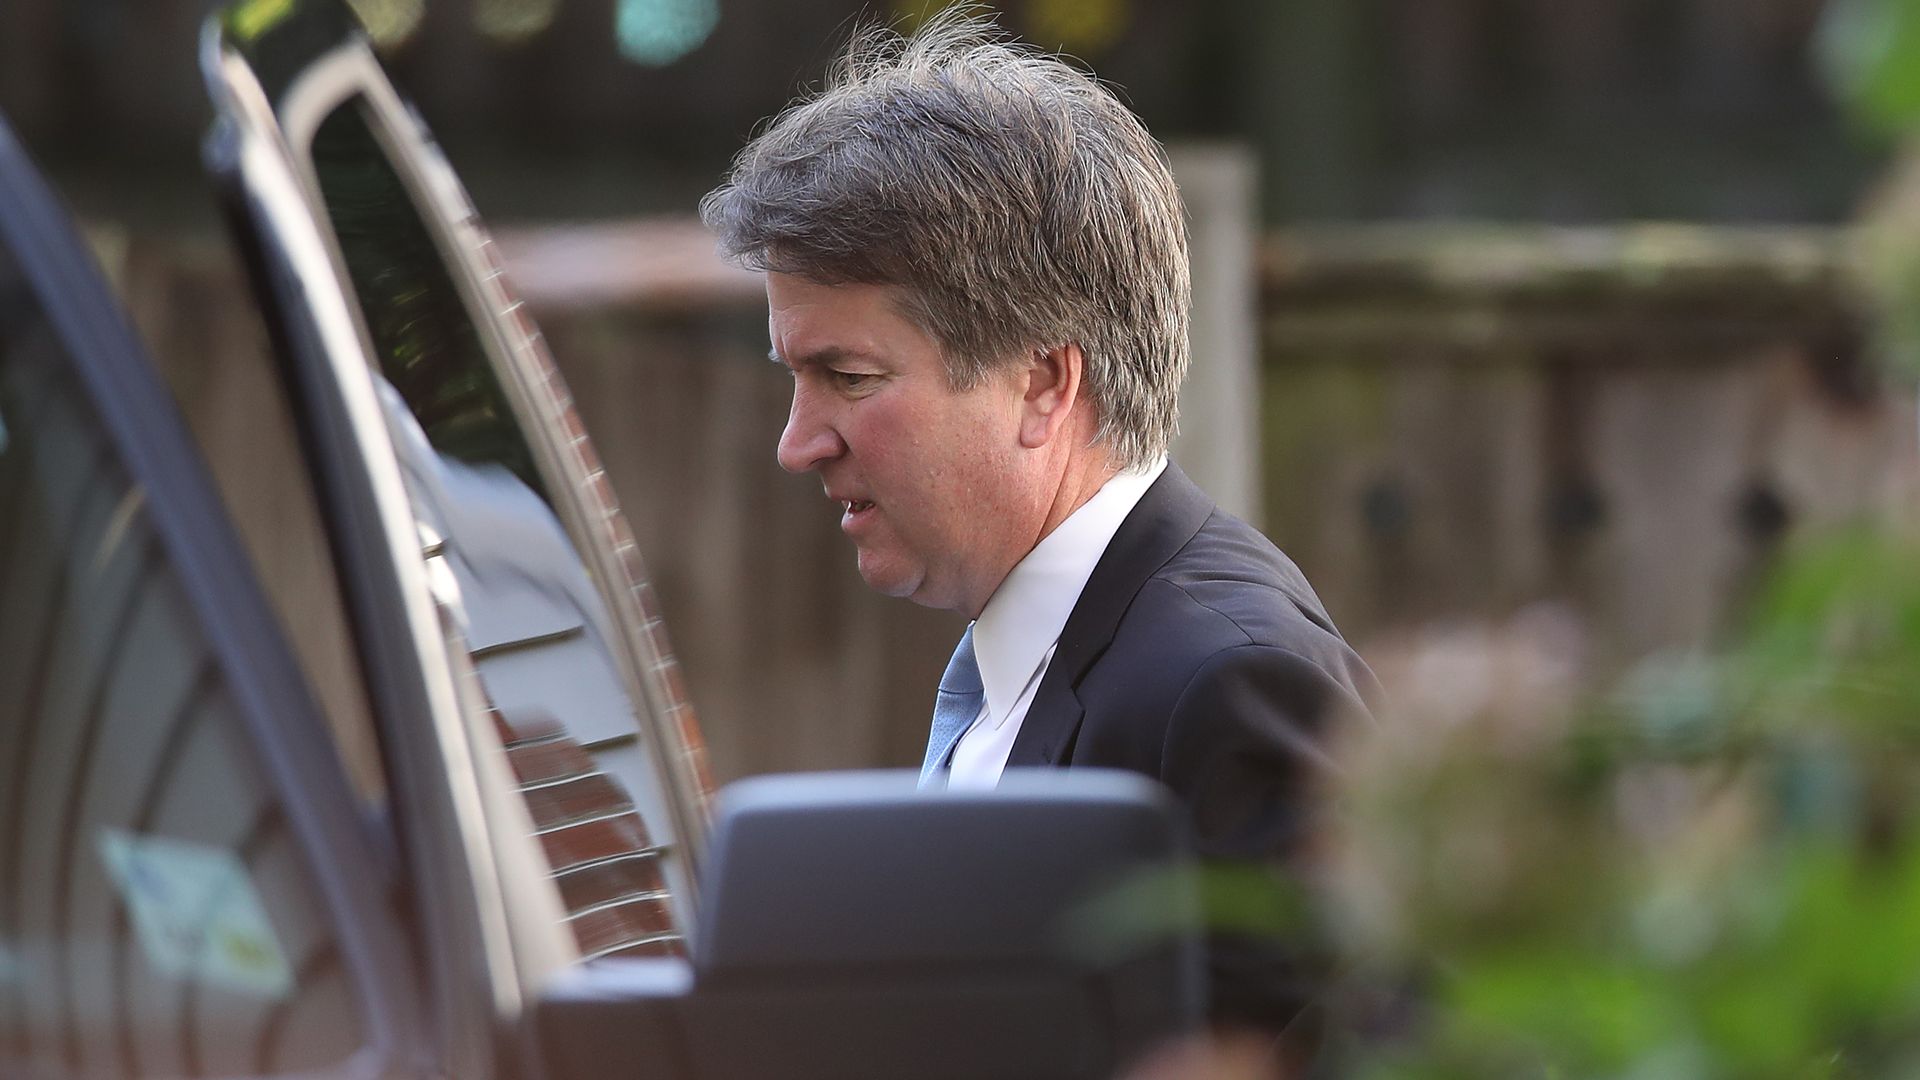  Supreme Court nominee Judge Brett Kavanaugh leaves his home in Maryland.